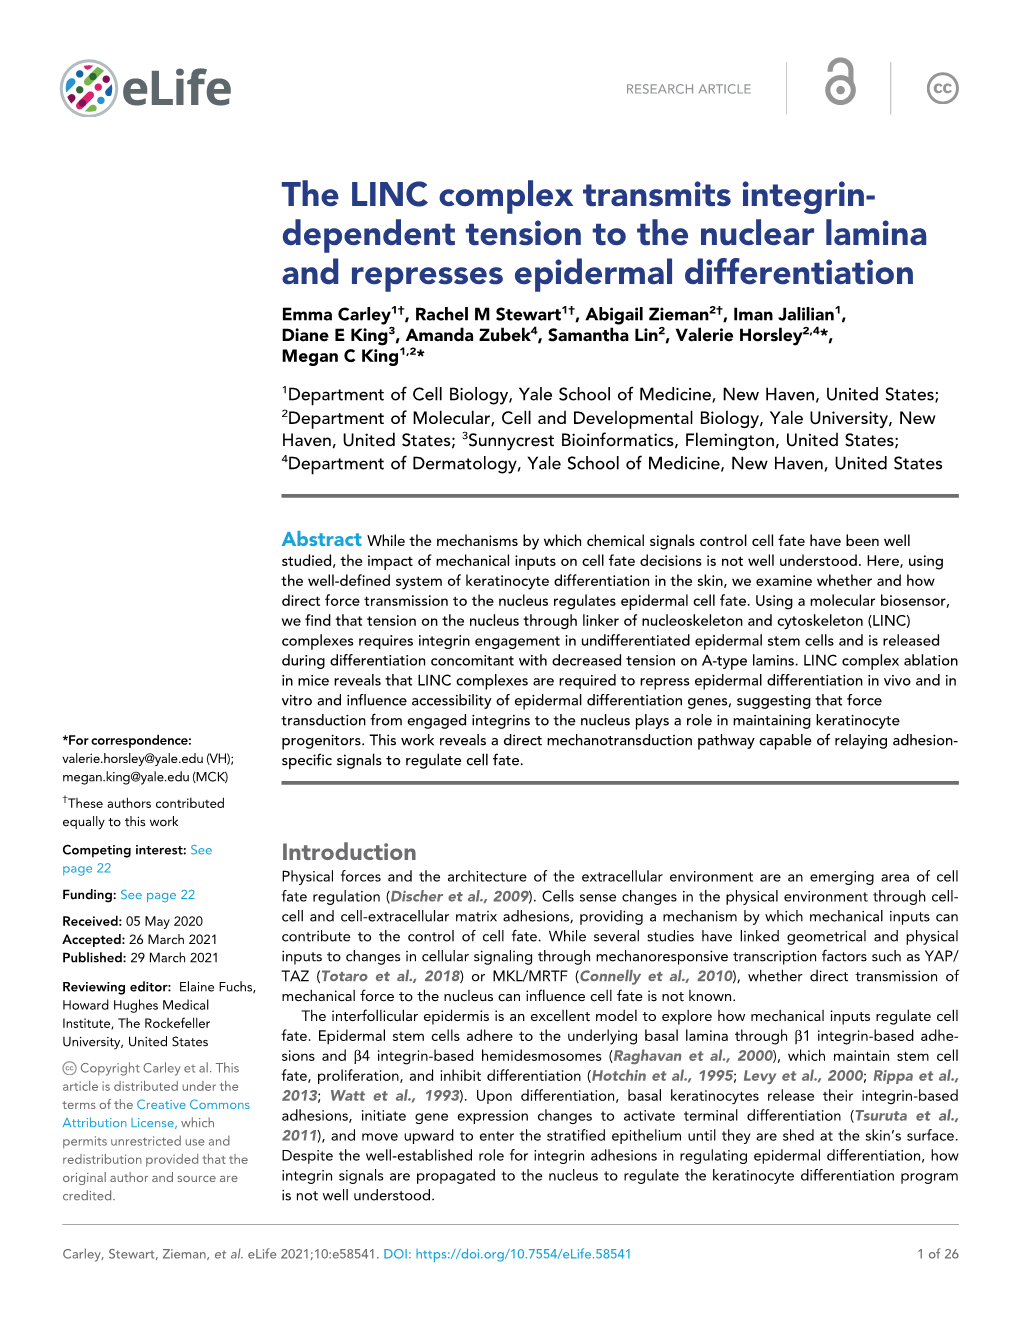 The LINC Complex Transmits Integrin- Dependent Tension to the Nuclear